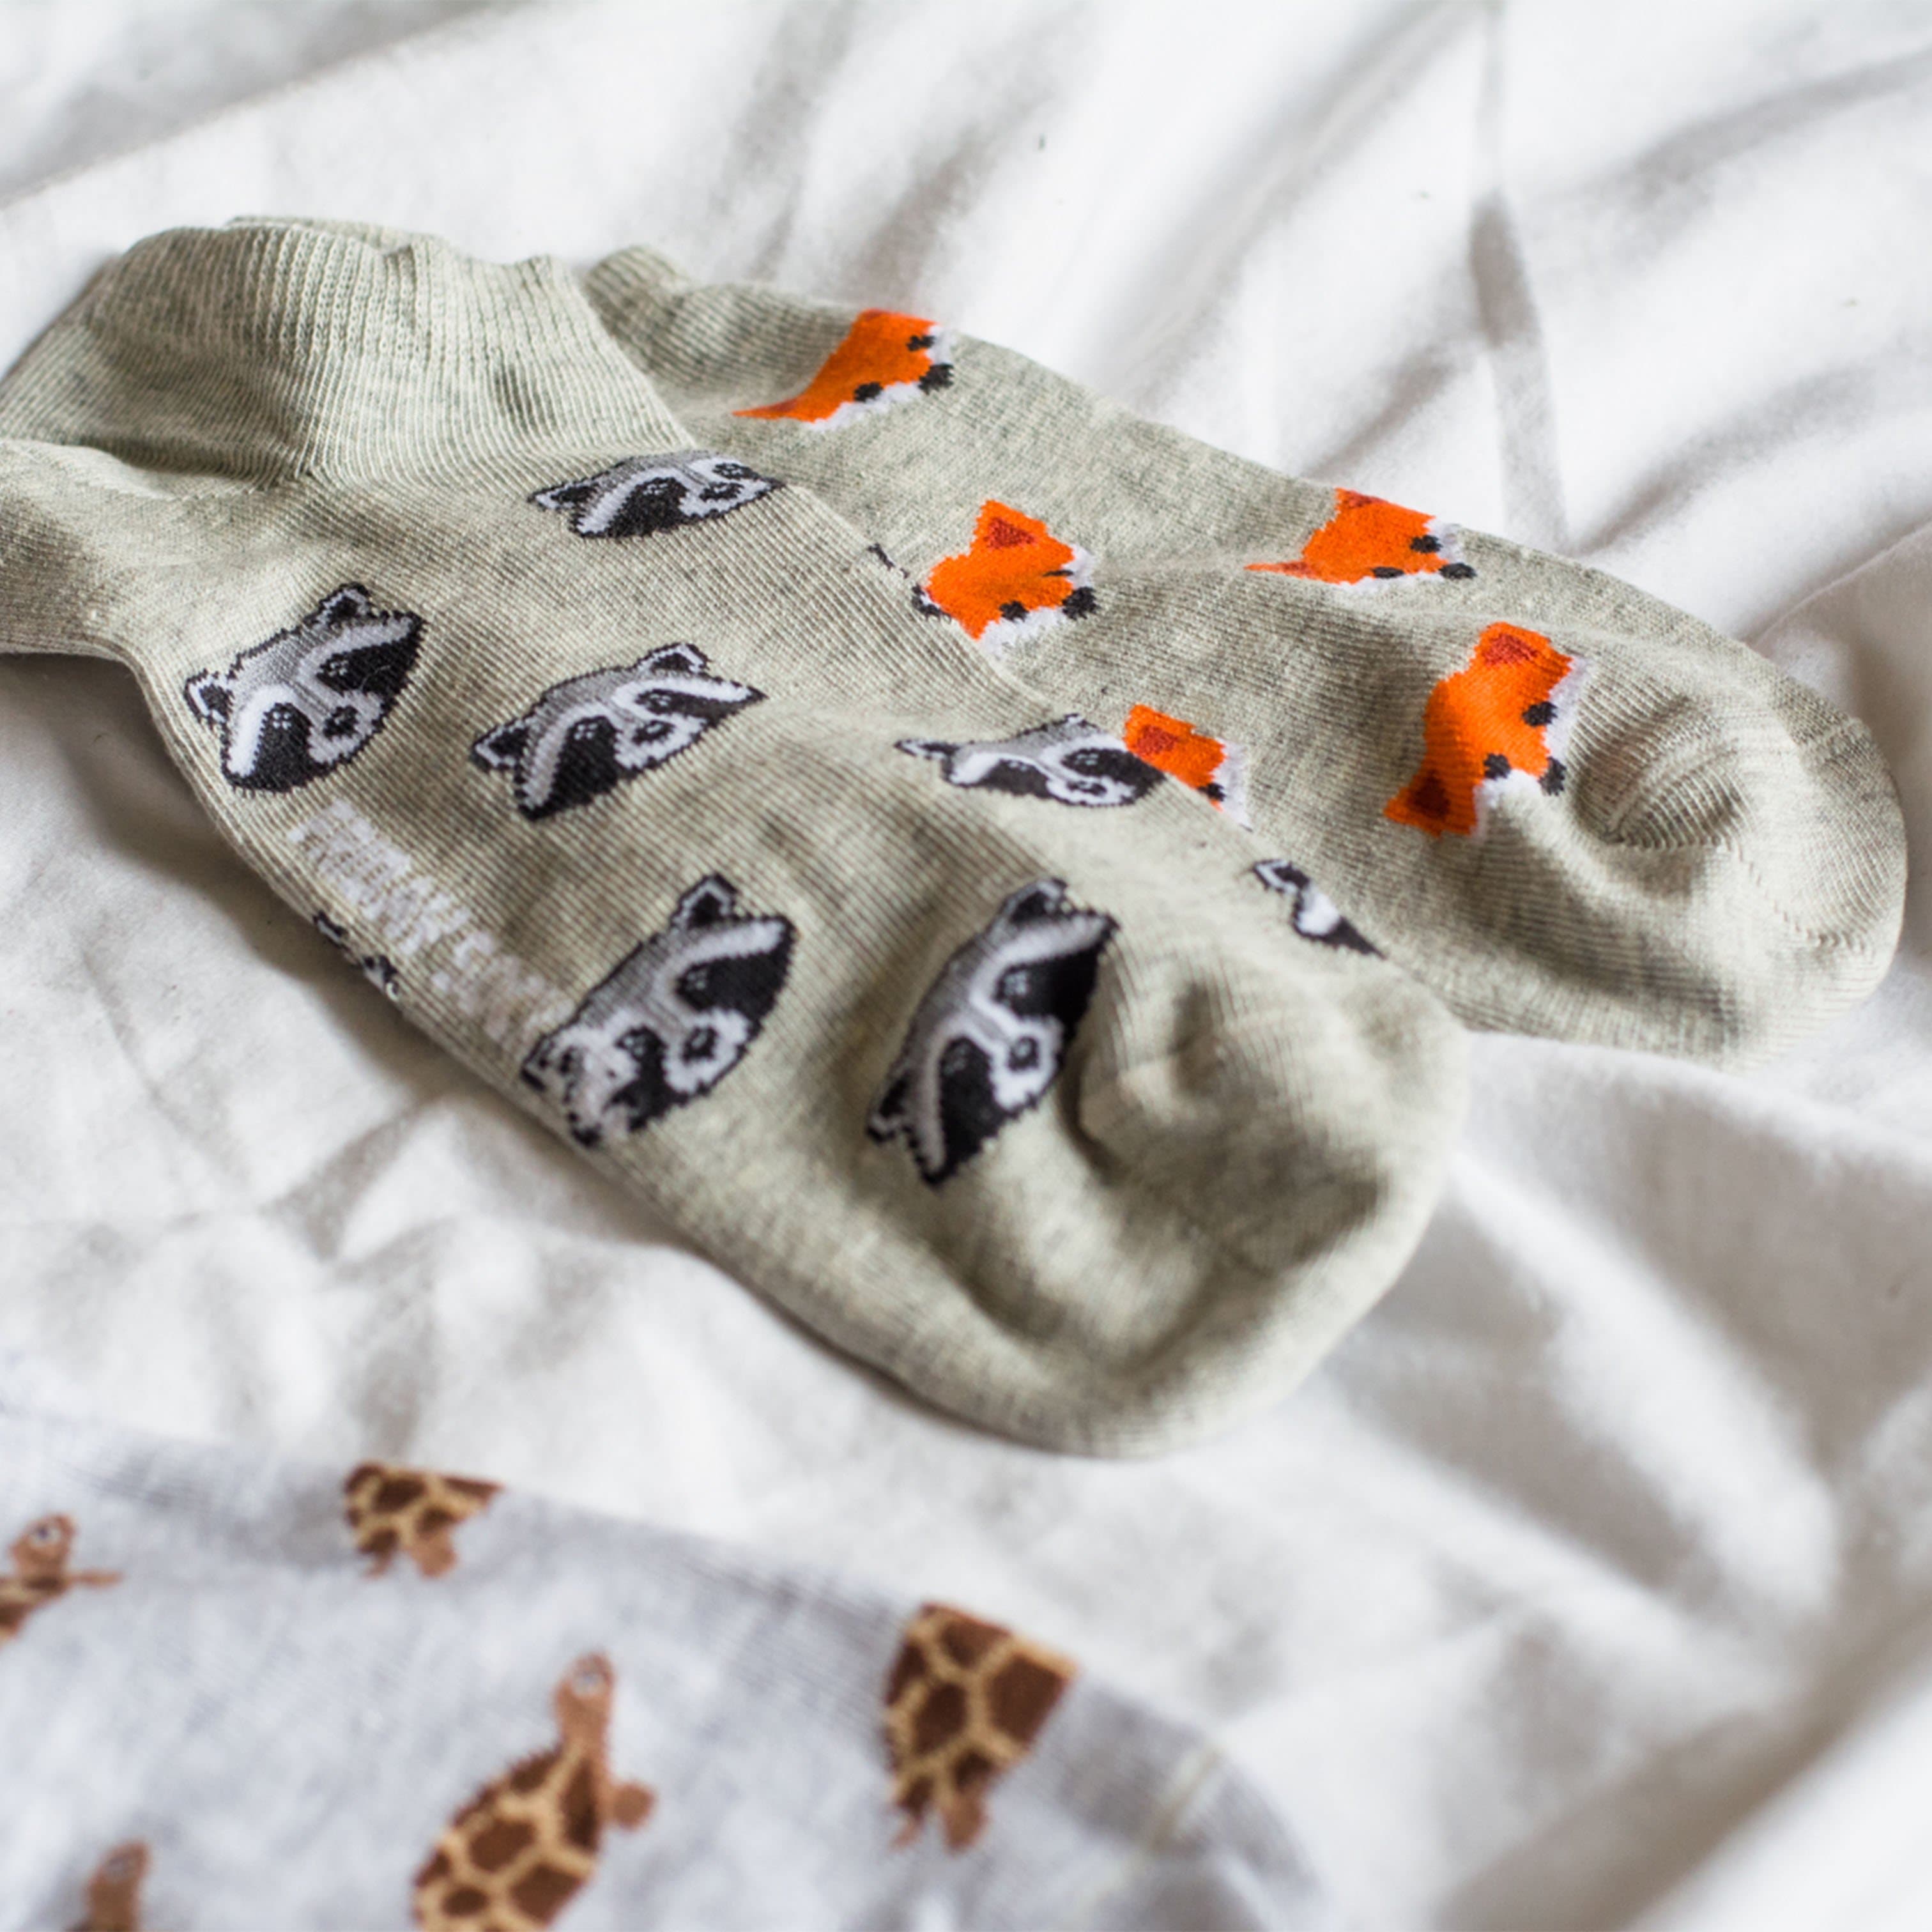 Men's Fox & Raccoon Ankle Socks | Mismatched by Design | Friday Sock Co.